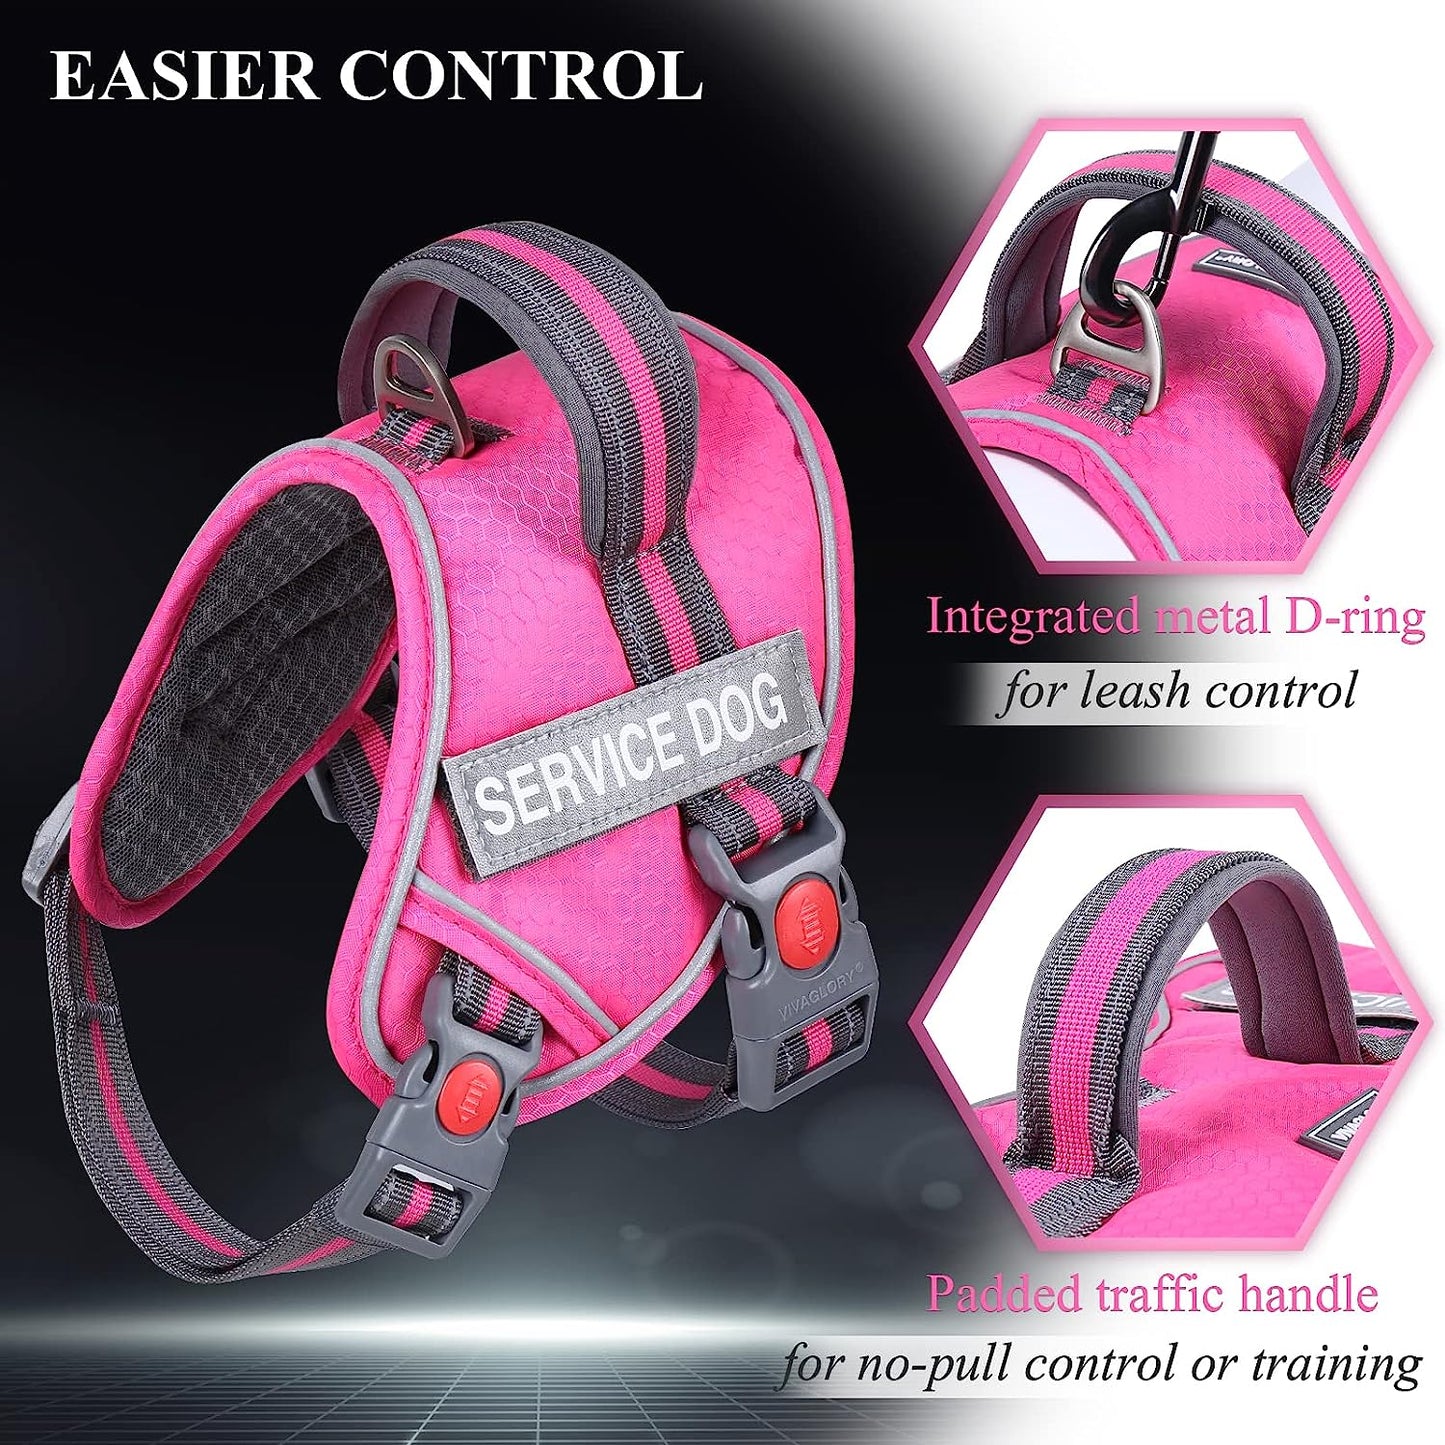 VIVAGLORY Service Dog Vest with Padded Handle, No Pull Adjustable Reflective Pet Vest Harness with 4 PCS Removable Patches for Small Dogs in Training, Pink